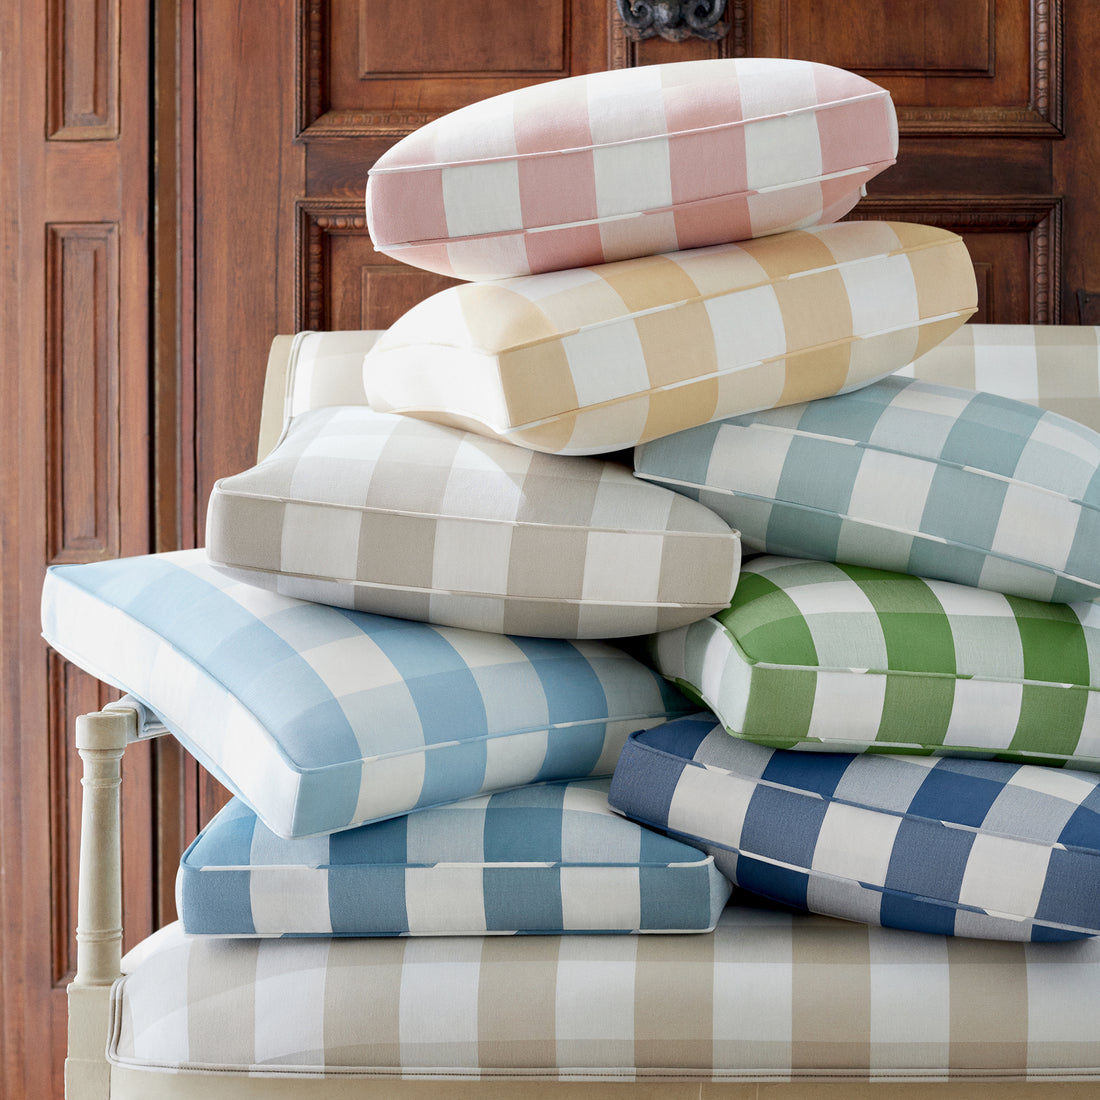 Pillows in Hammond Check woven fabric - pattern number AW24507 - by Anna French in the Devon collection